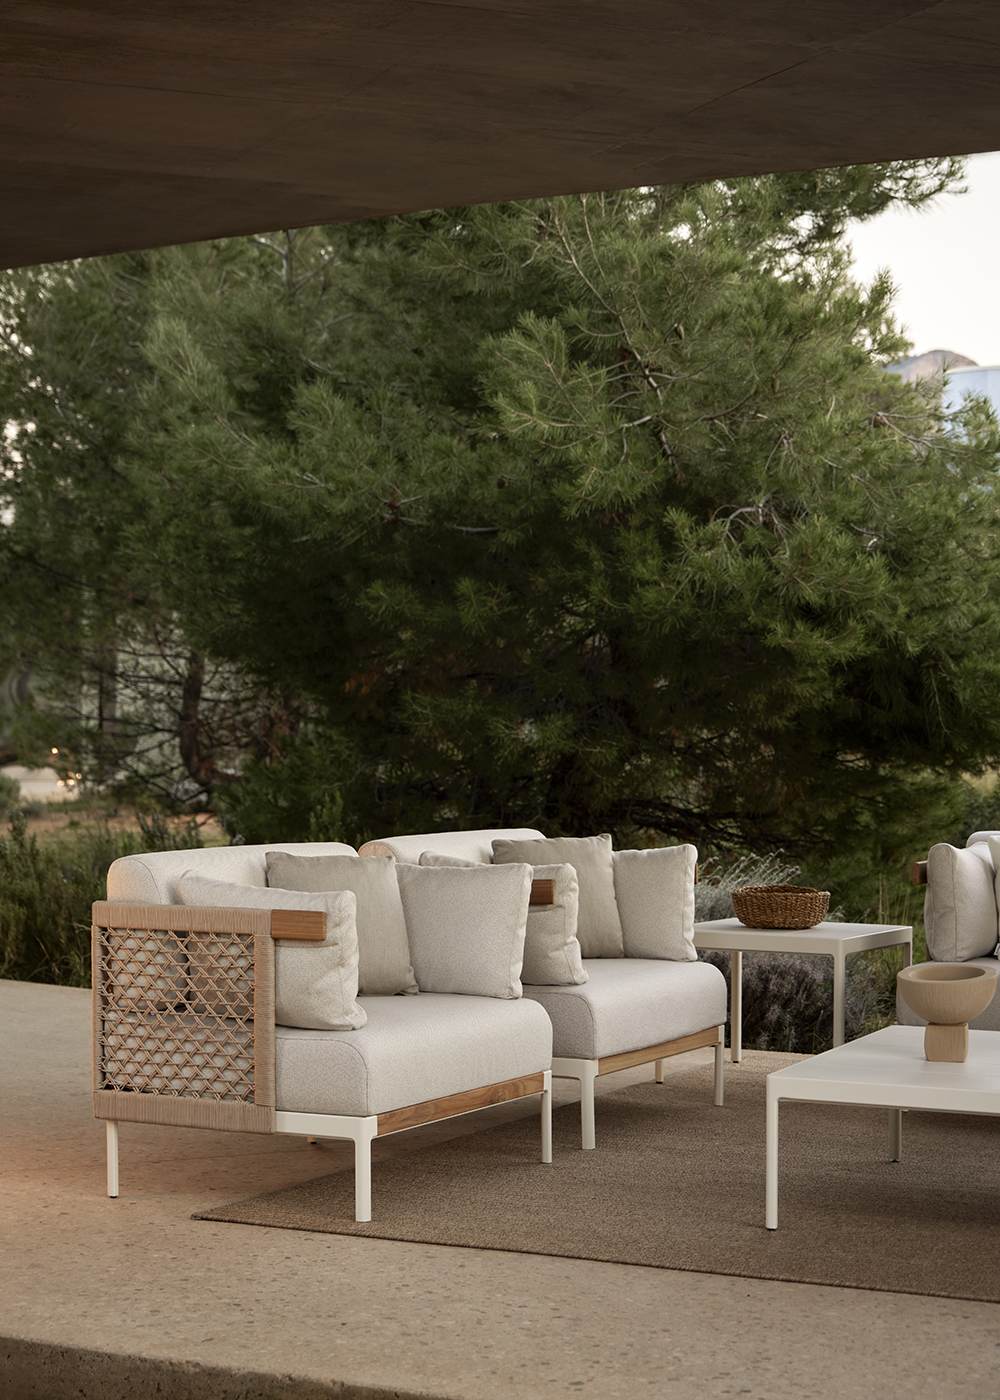 POINT | Outdoor Furniture | Design, Innovation and Quality